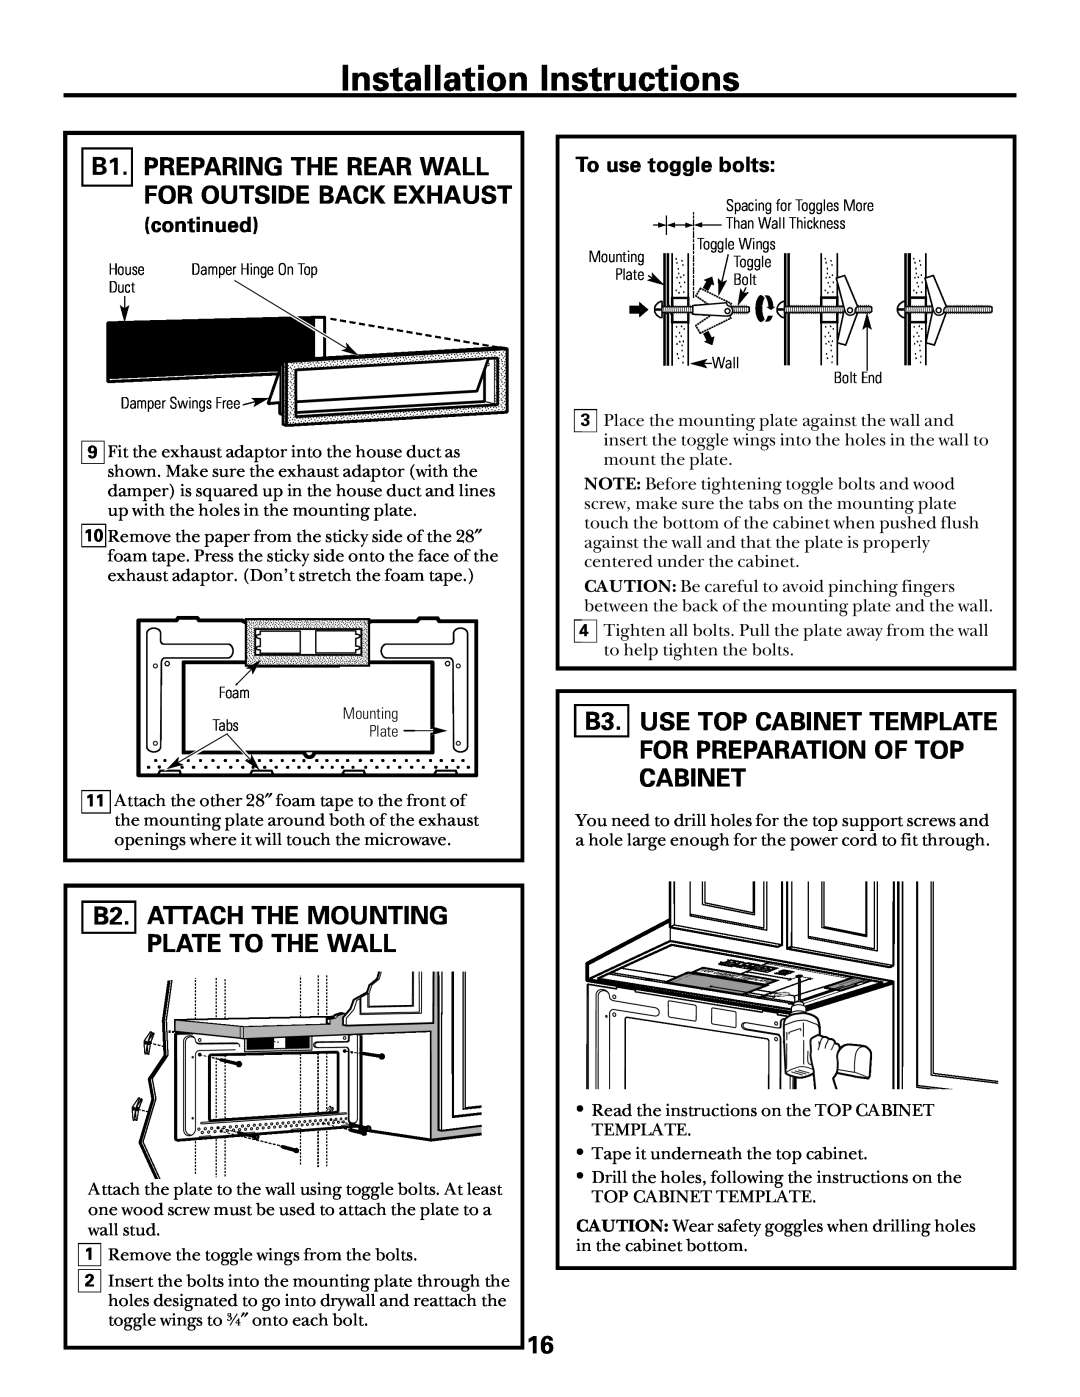 GE Over the Range Microwave Oven manual B2. ATTACH THE MOUNTING PLATE TO THE WALL, continued, Installation Instructions 